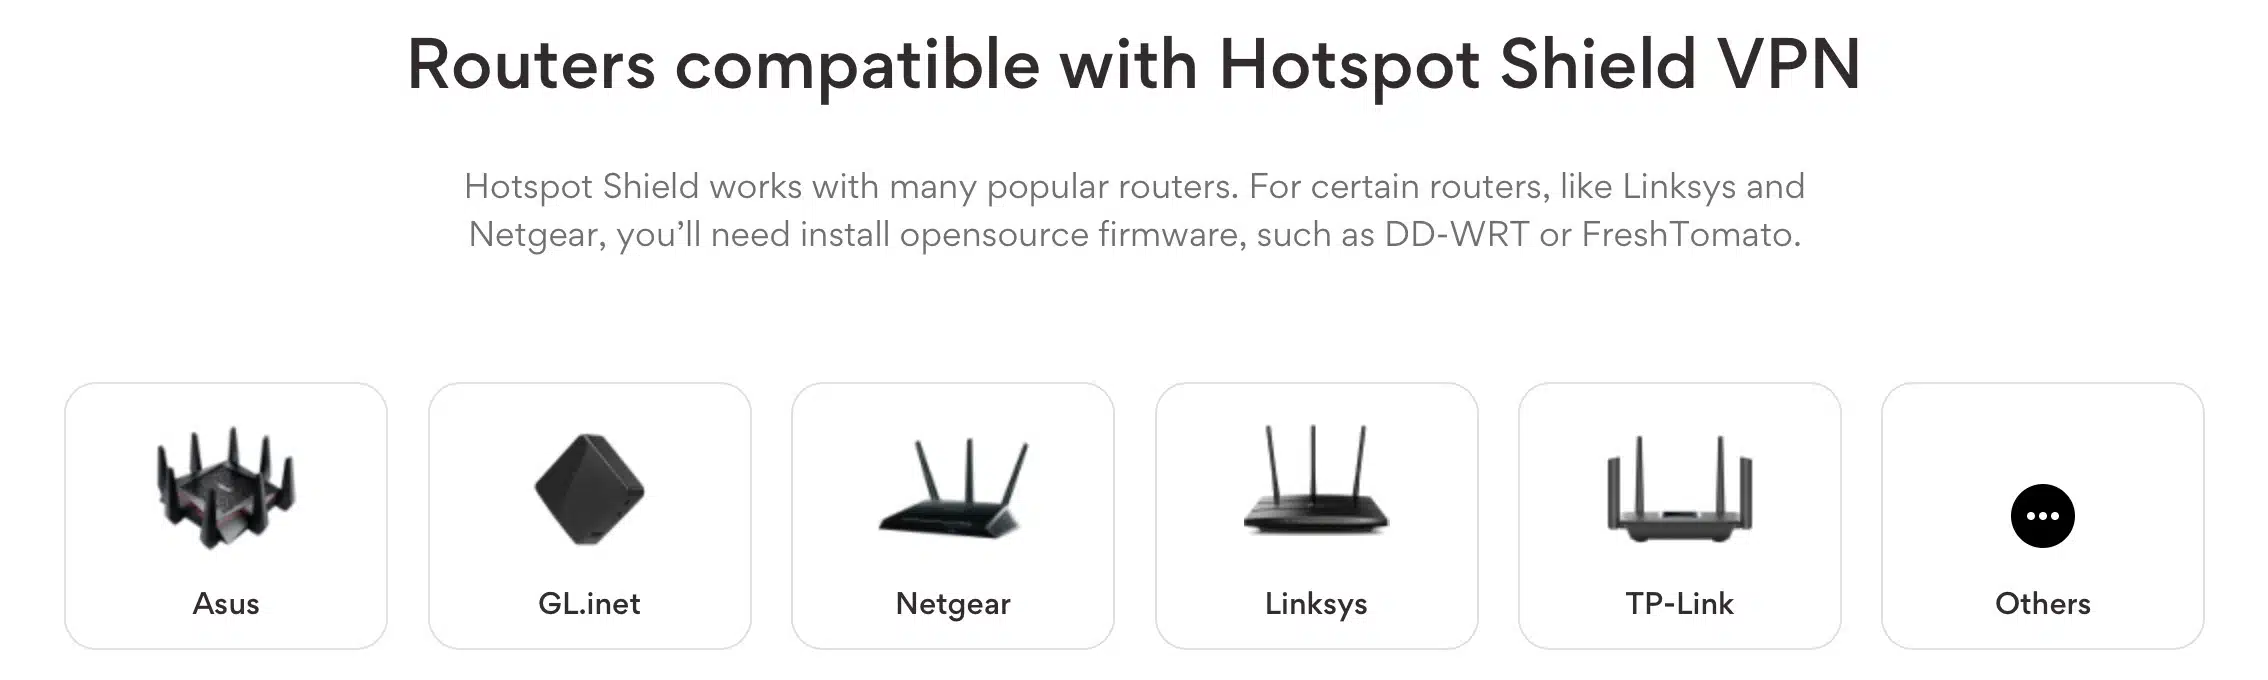 Routers HSS